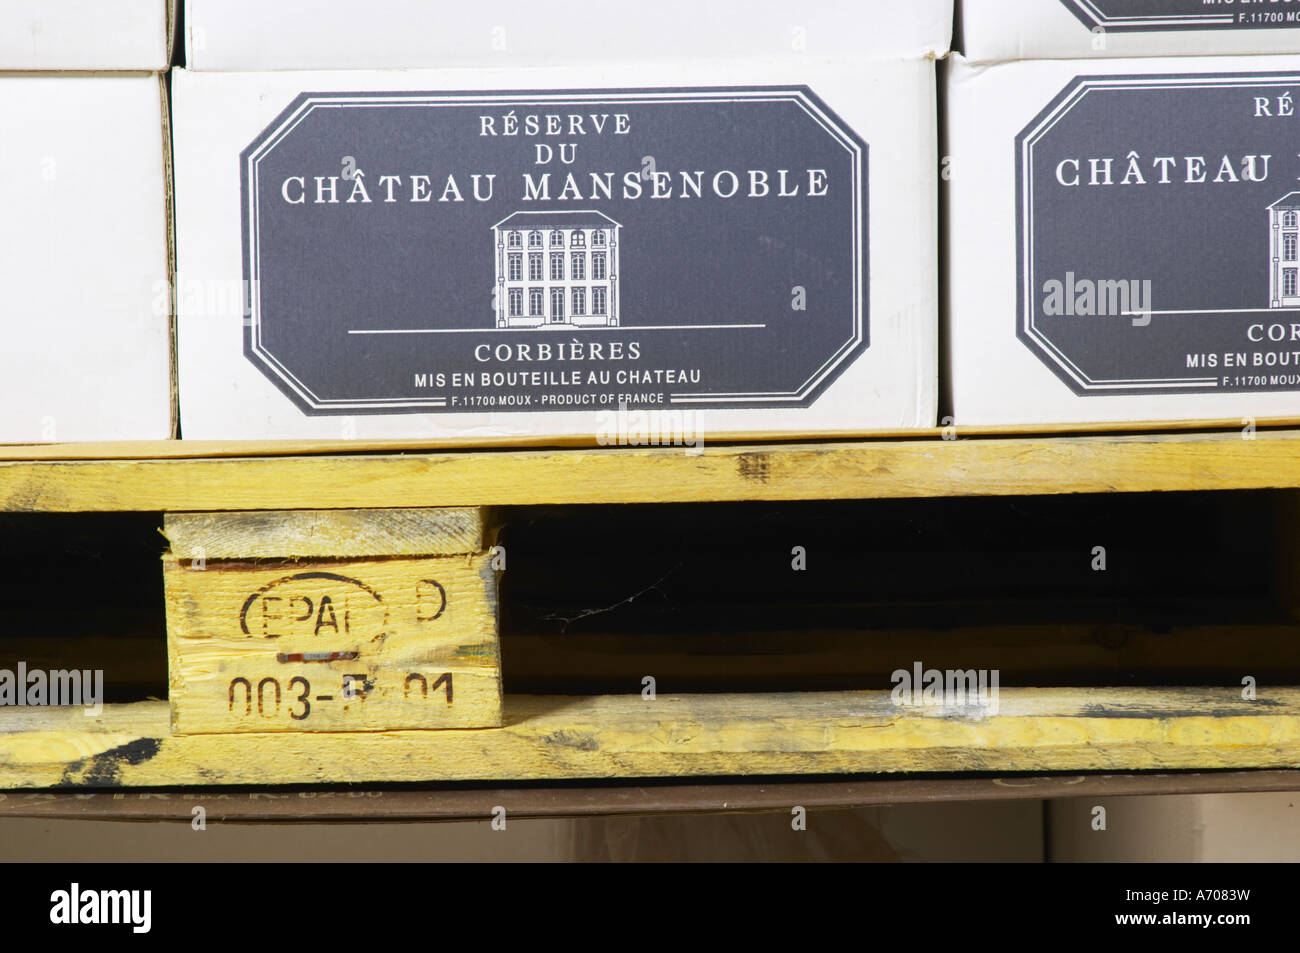 Wine case carton. Chateau Mansenoble. In Moux. Les Corbieres. Languedoc. Barrel cellar. France. Europe. Stock Photo